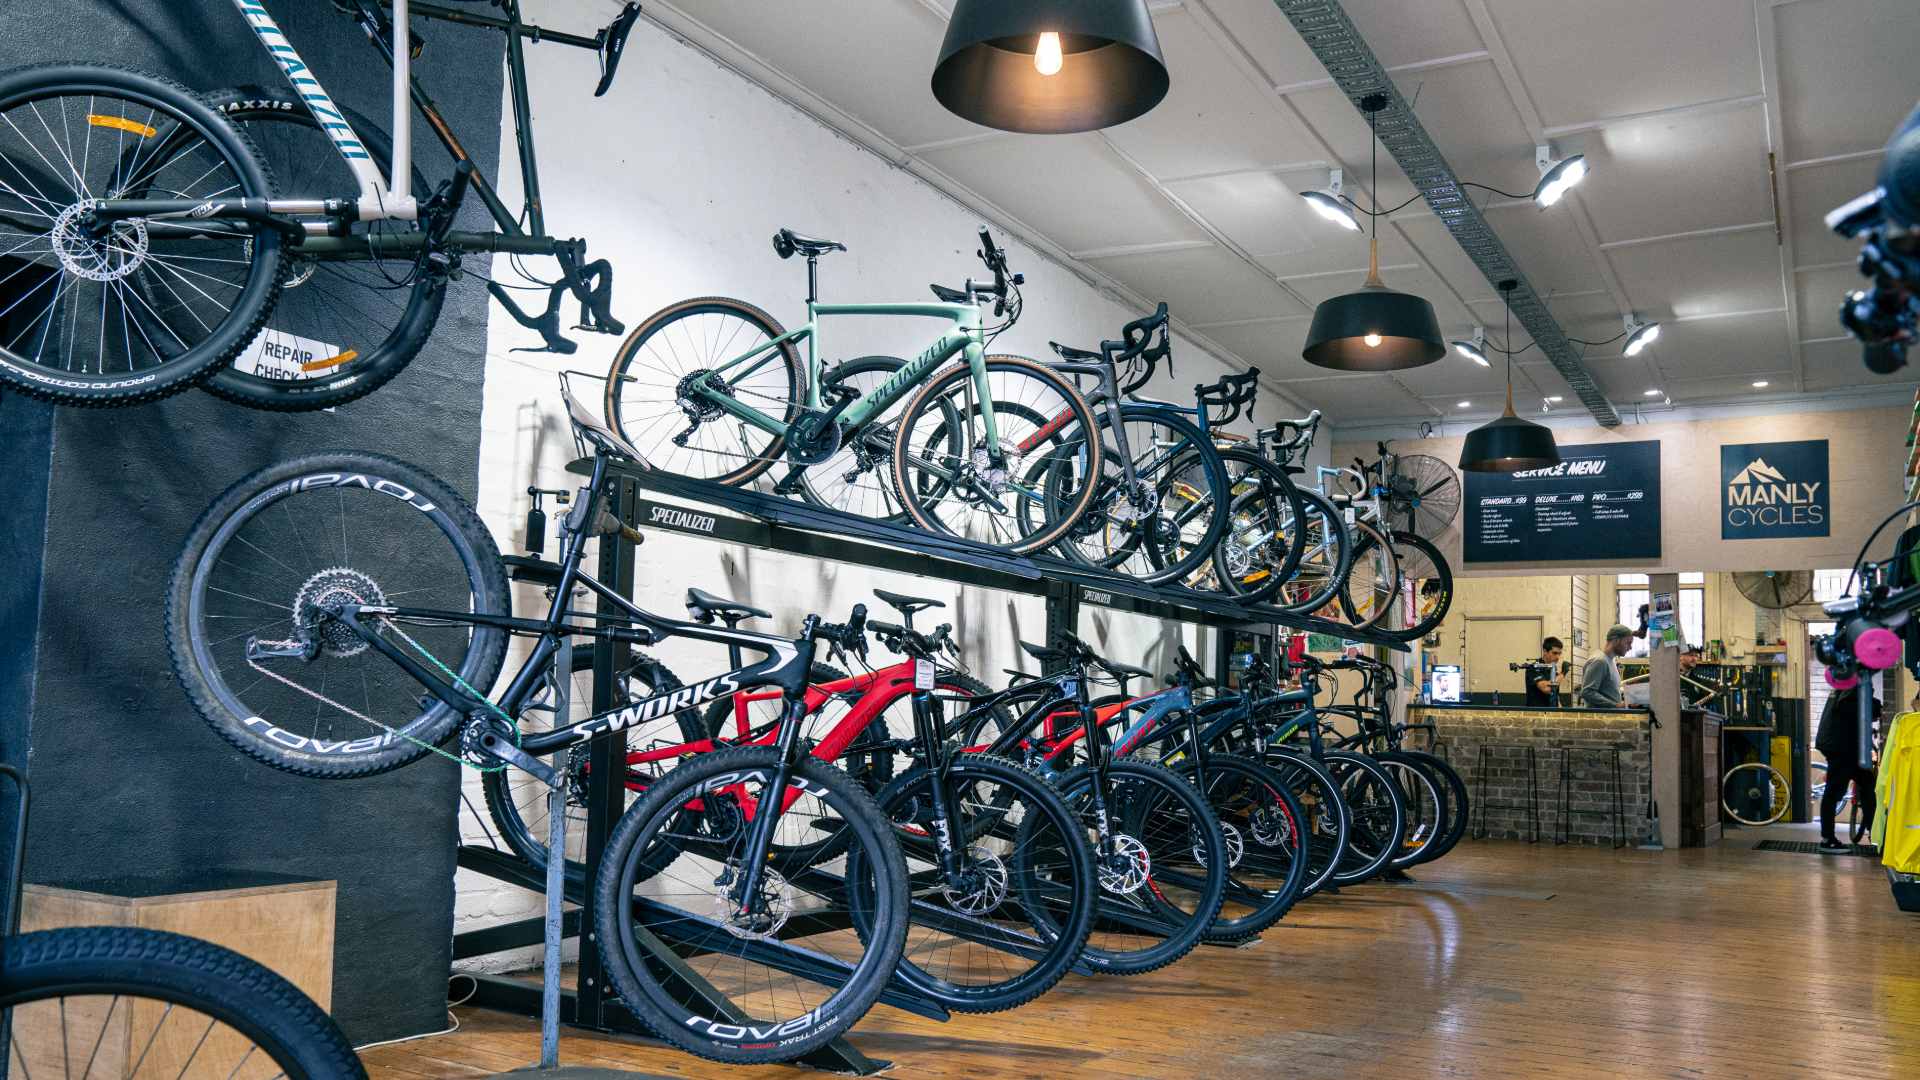 Bikes in a row in Manly bike shop